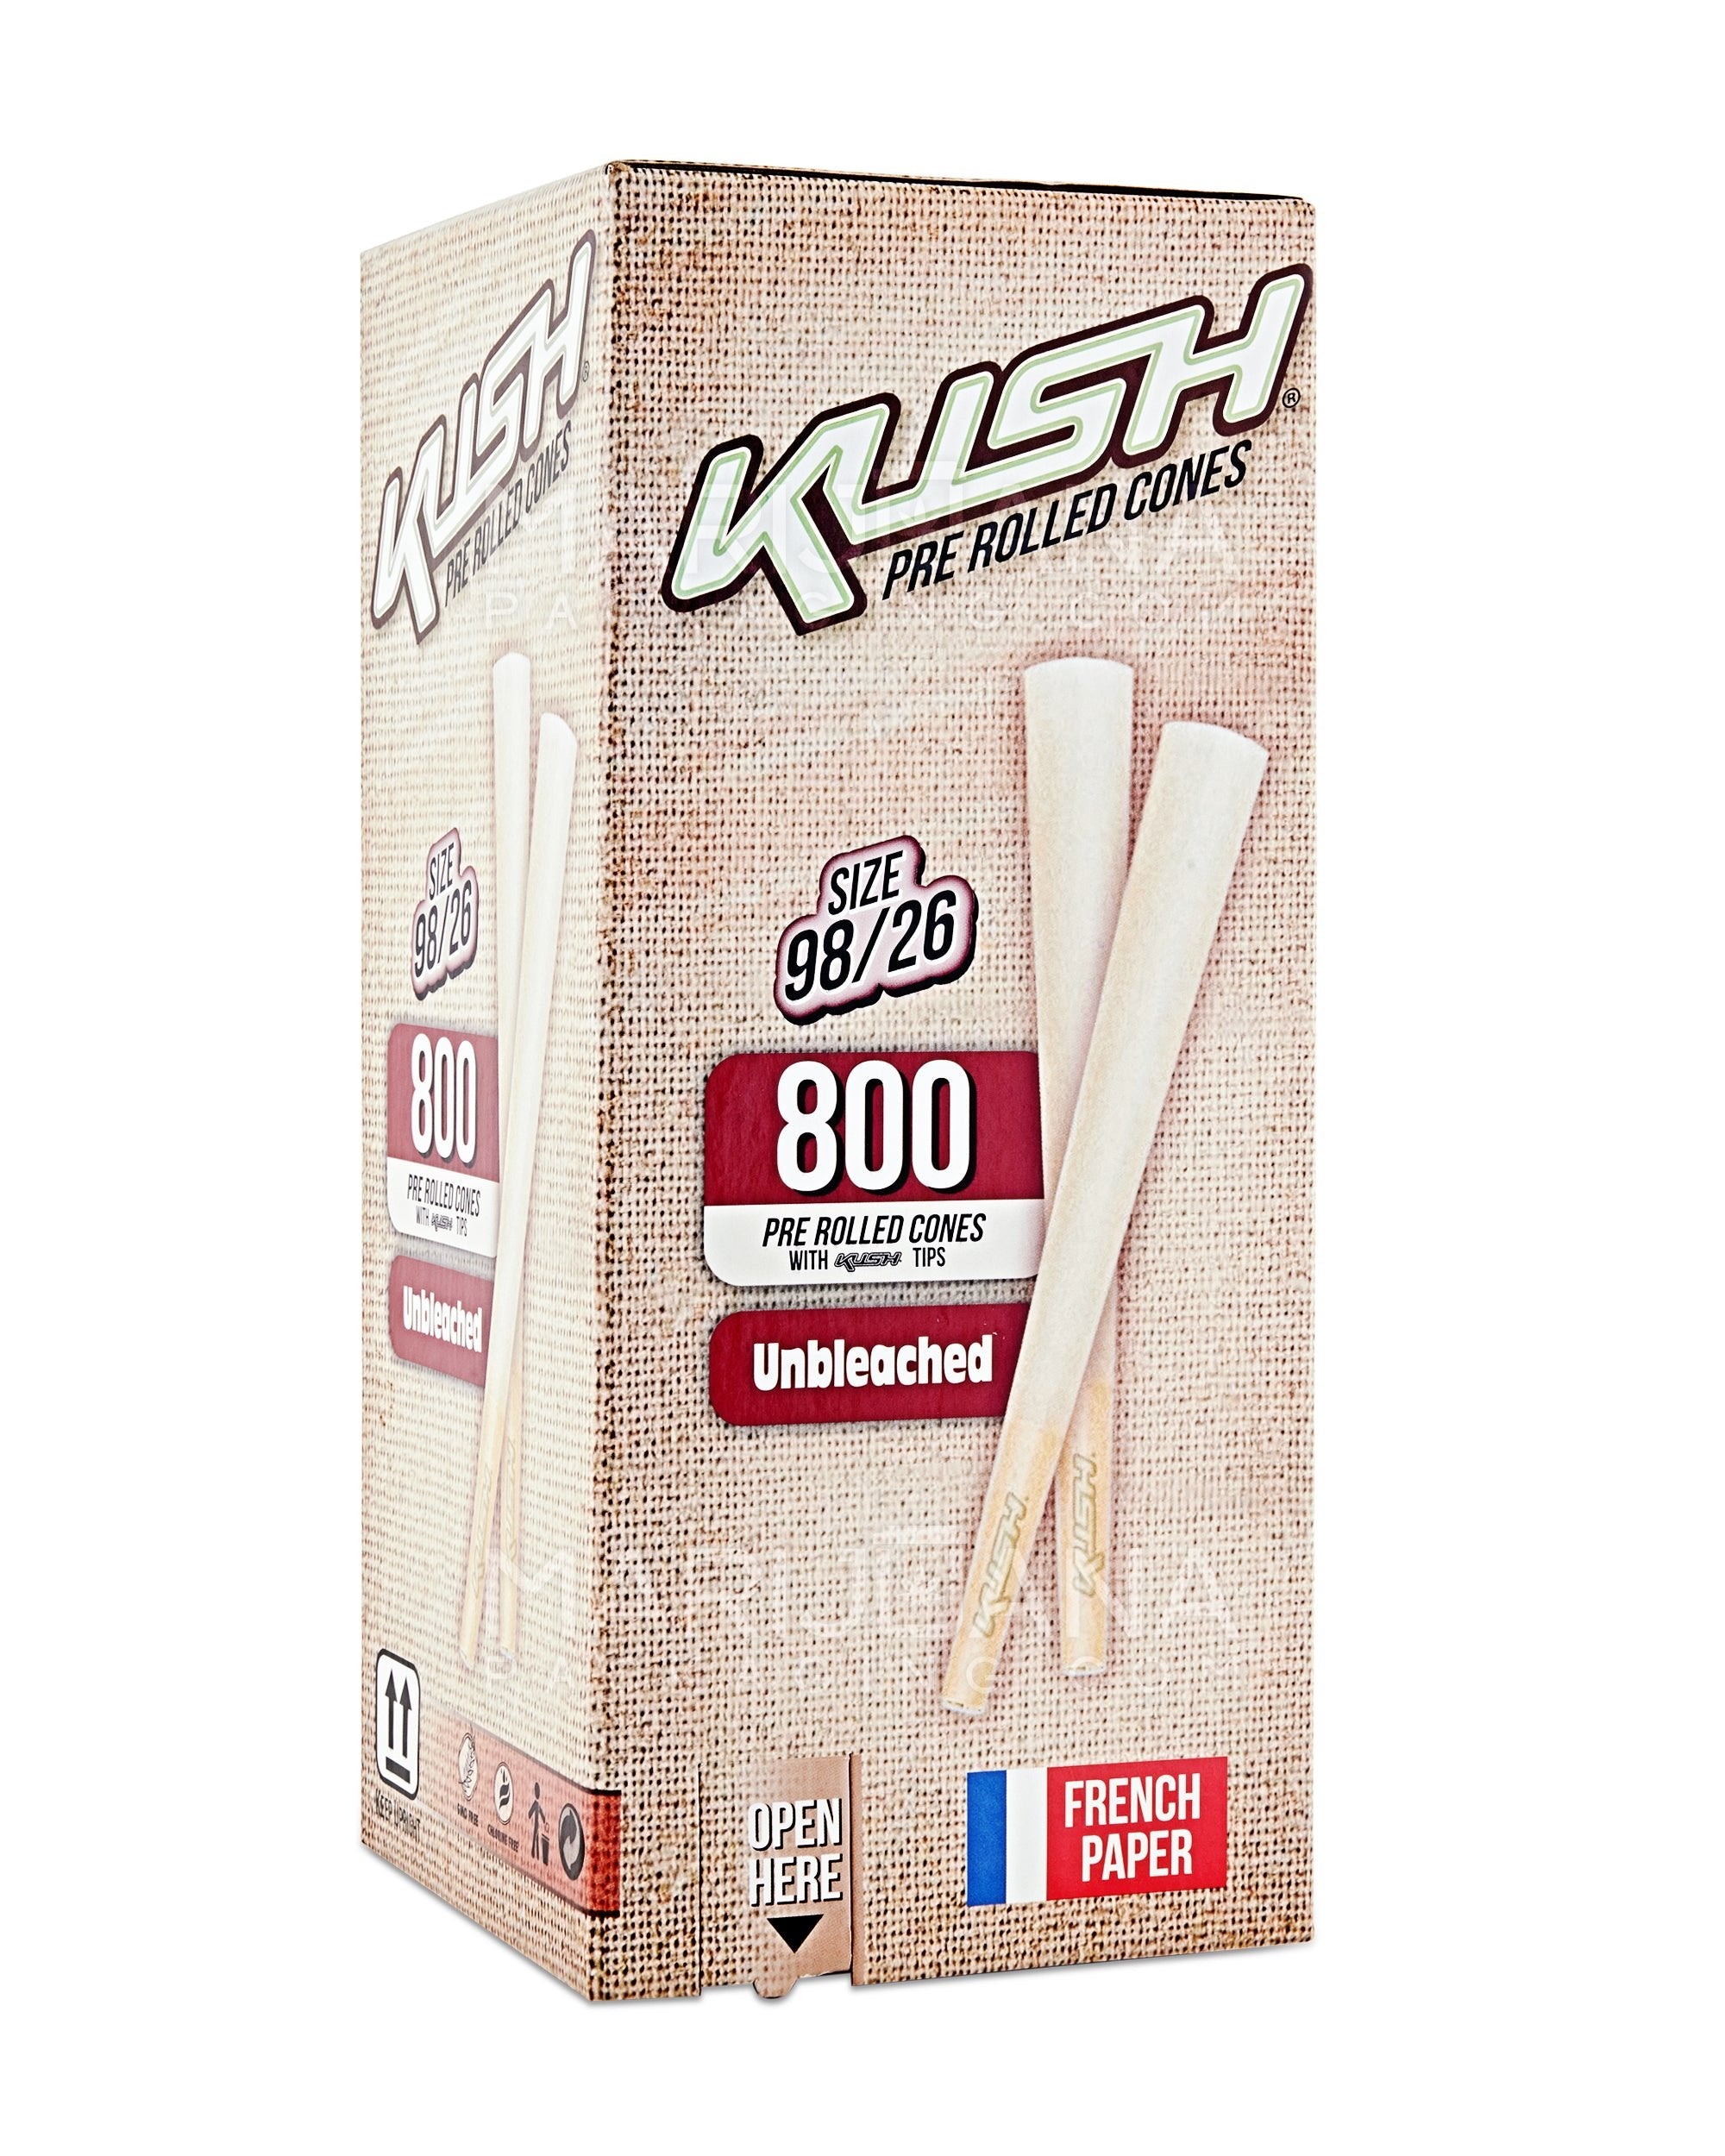 KUSH | Unbleached 98 Special Size Pre-Rolled Cones w/ Filter Tip | 98mm - Brown Paper - 800 Count - 1